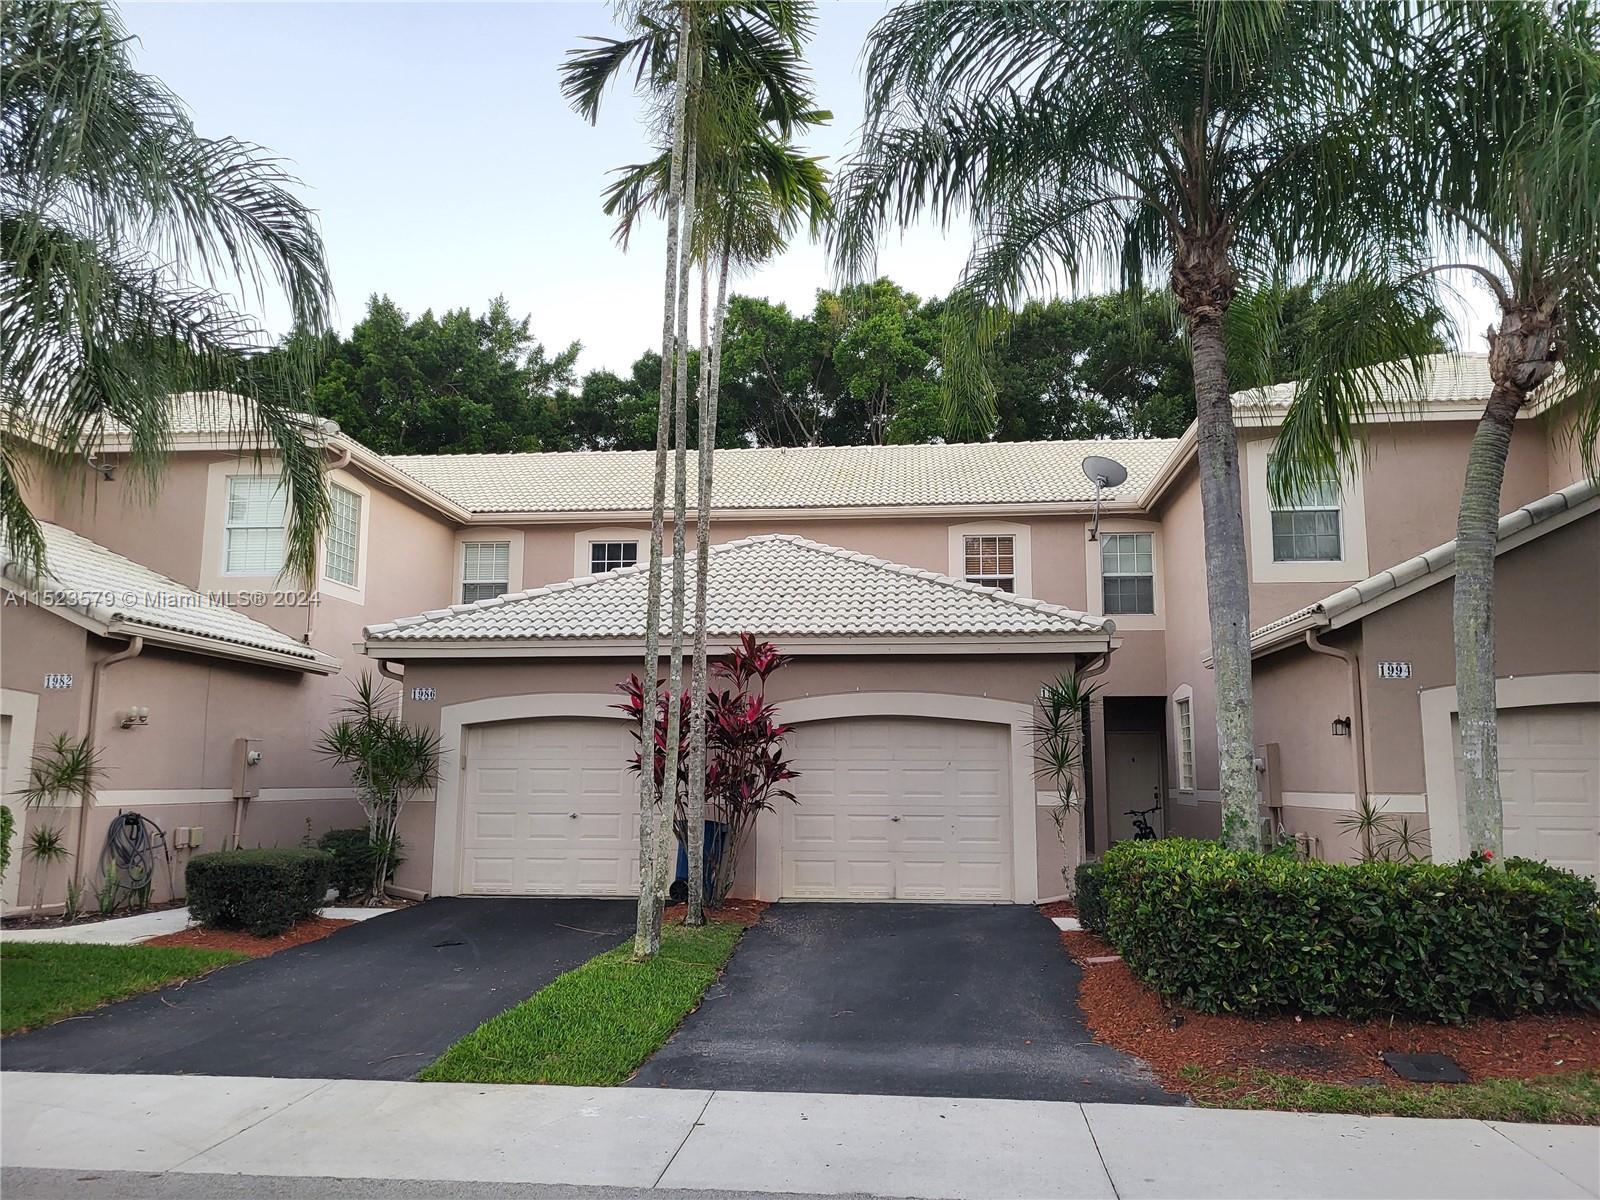 Photo of 1990 Madeira Dr in Weston, FL